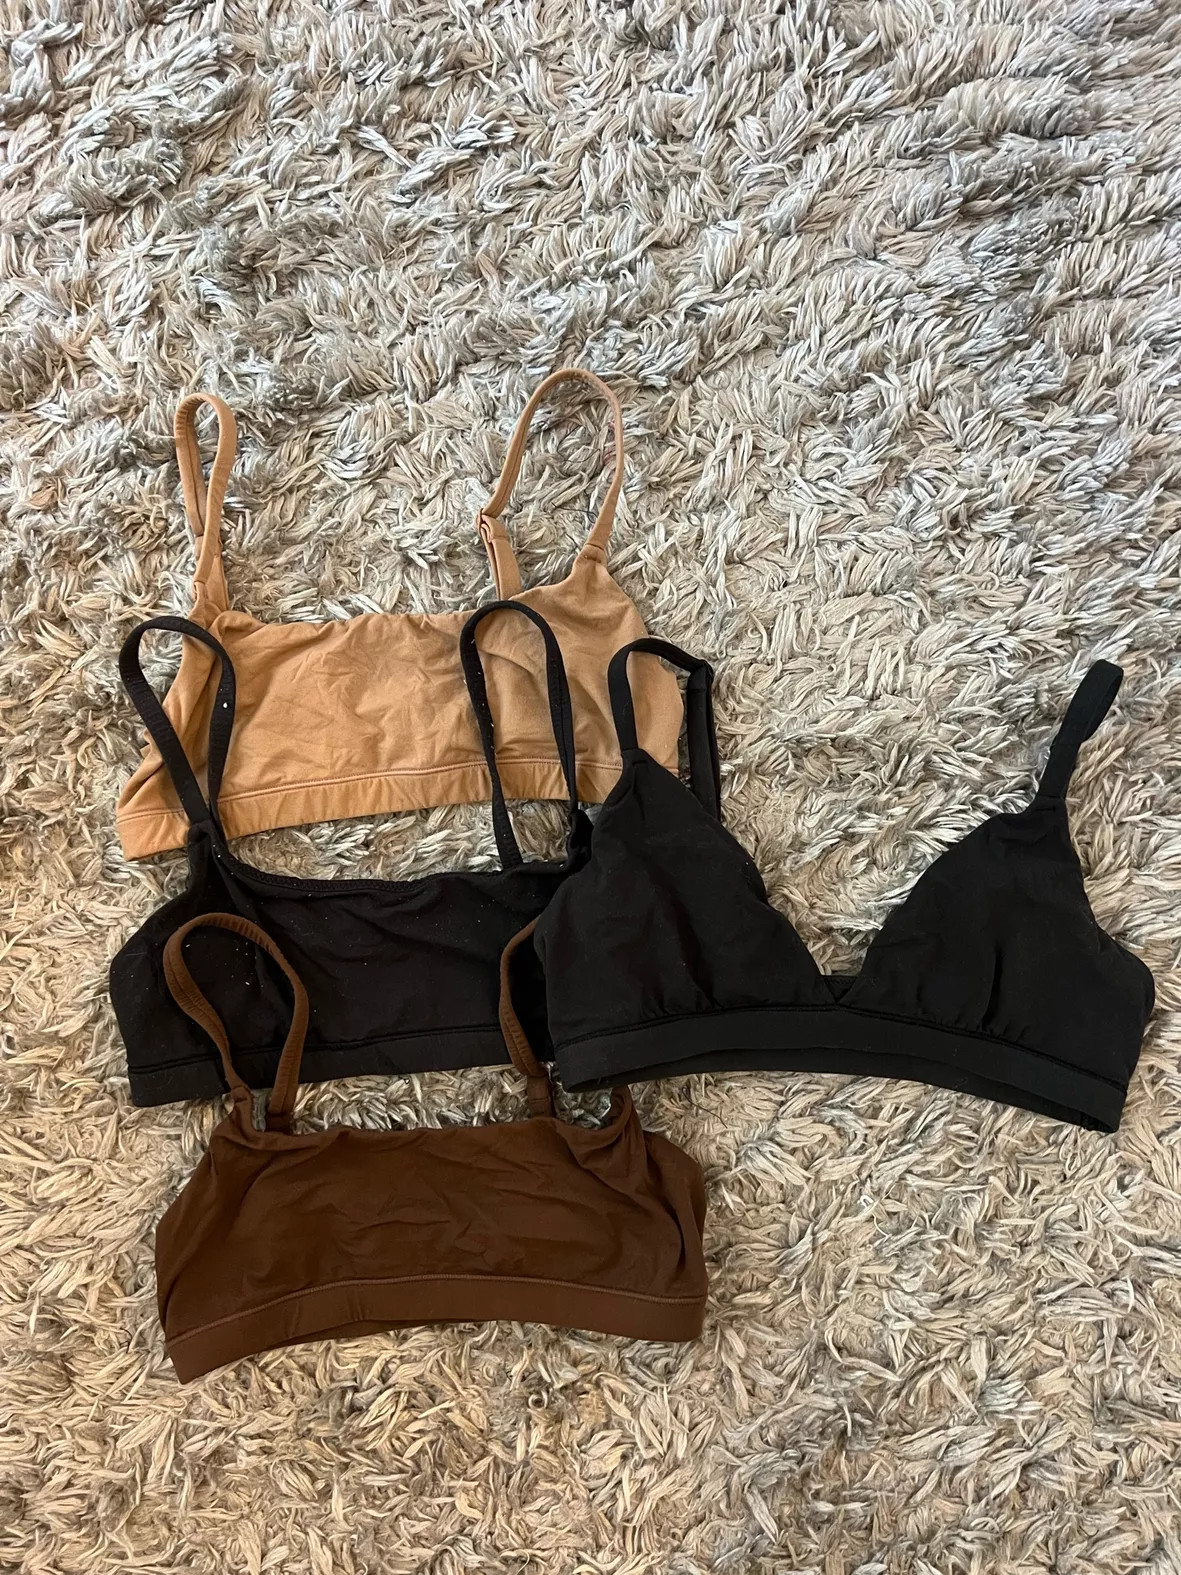 FITS EVERYBODY TRIANGLE BRALETTE